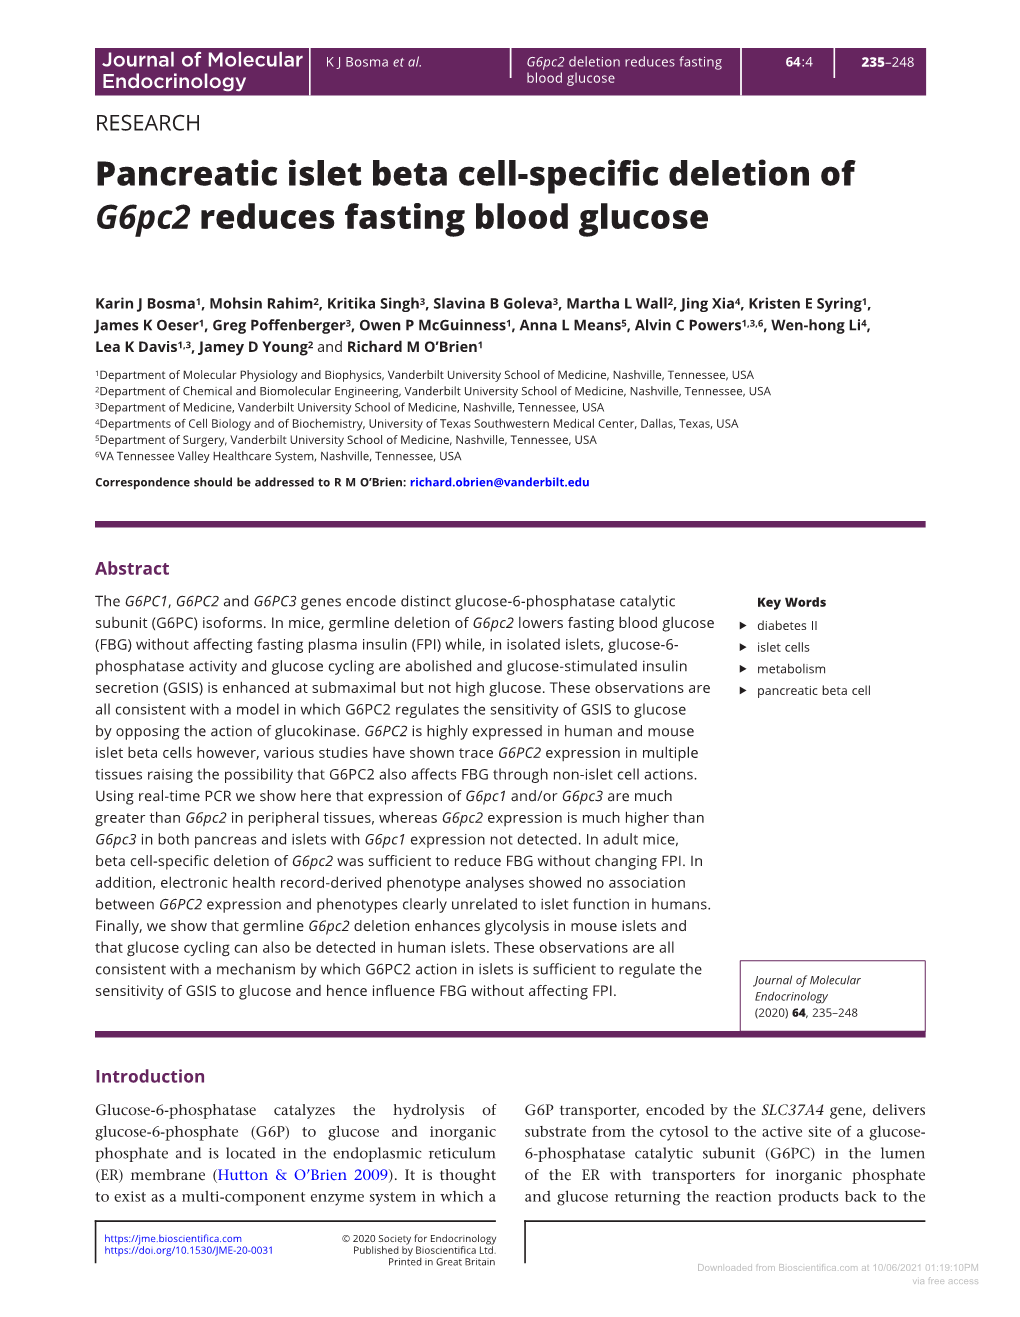 Pancreatic Islet Beta Cell-Specific Deletion of G6pc2 Reduces Fasting Blood Glucose